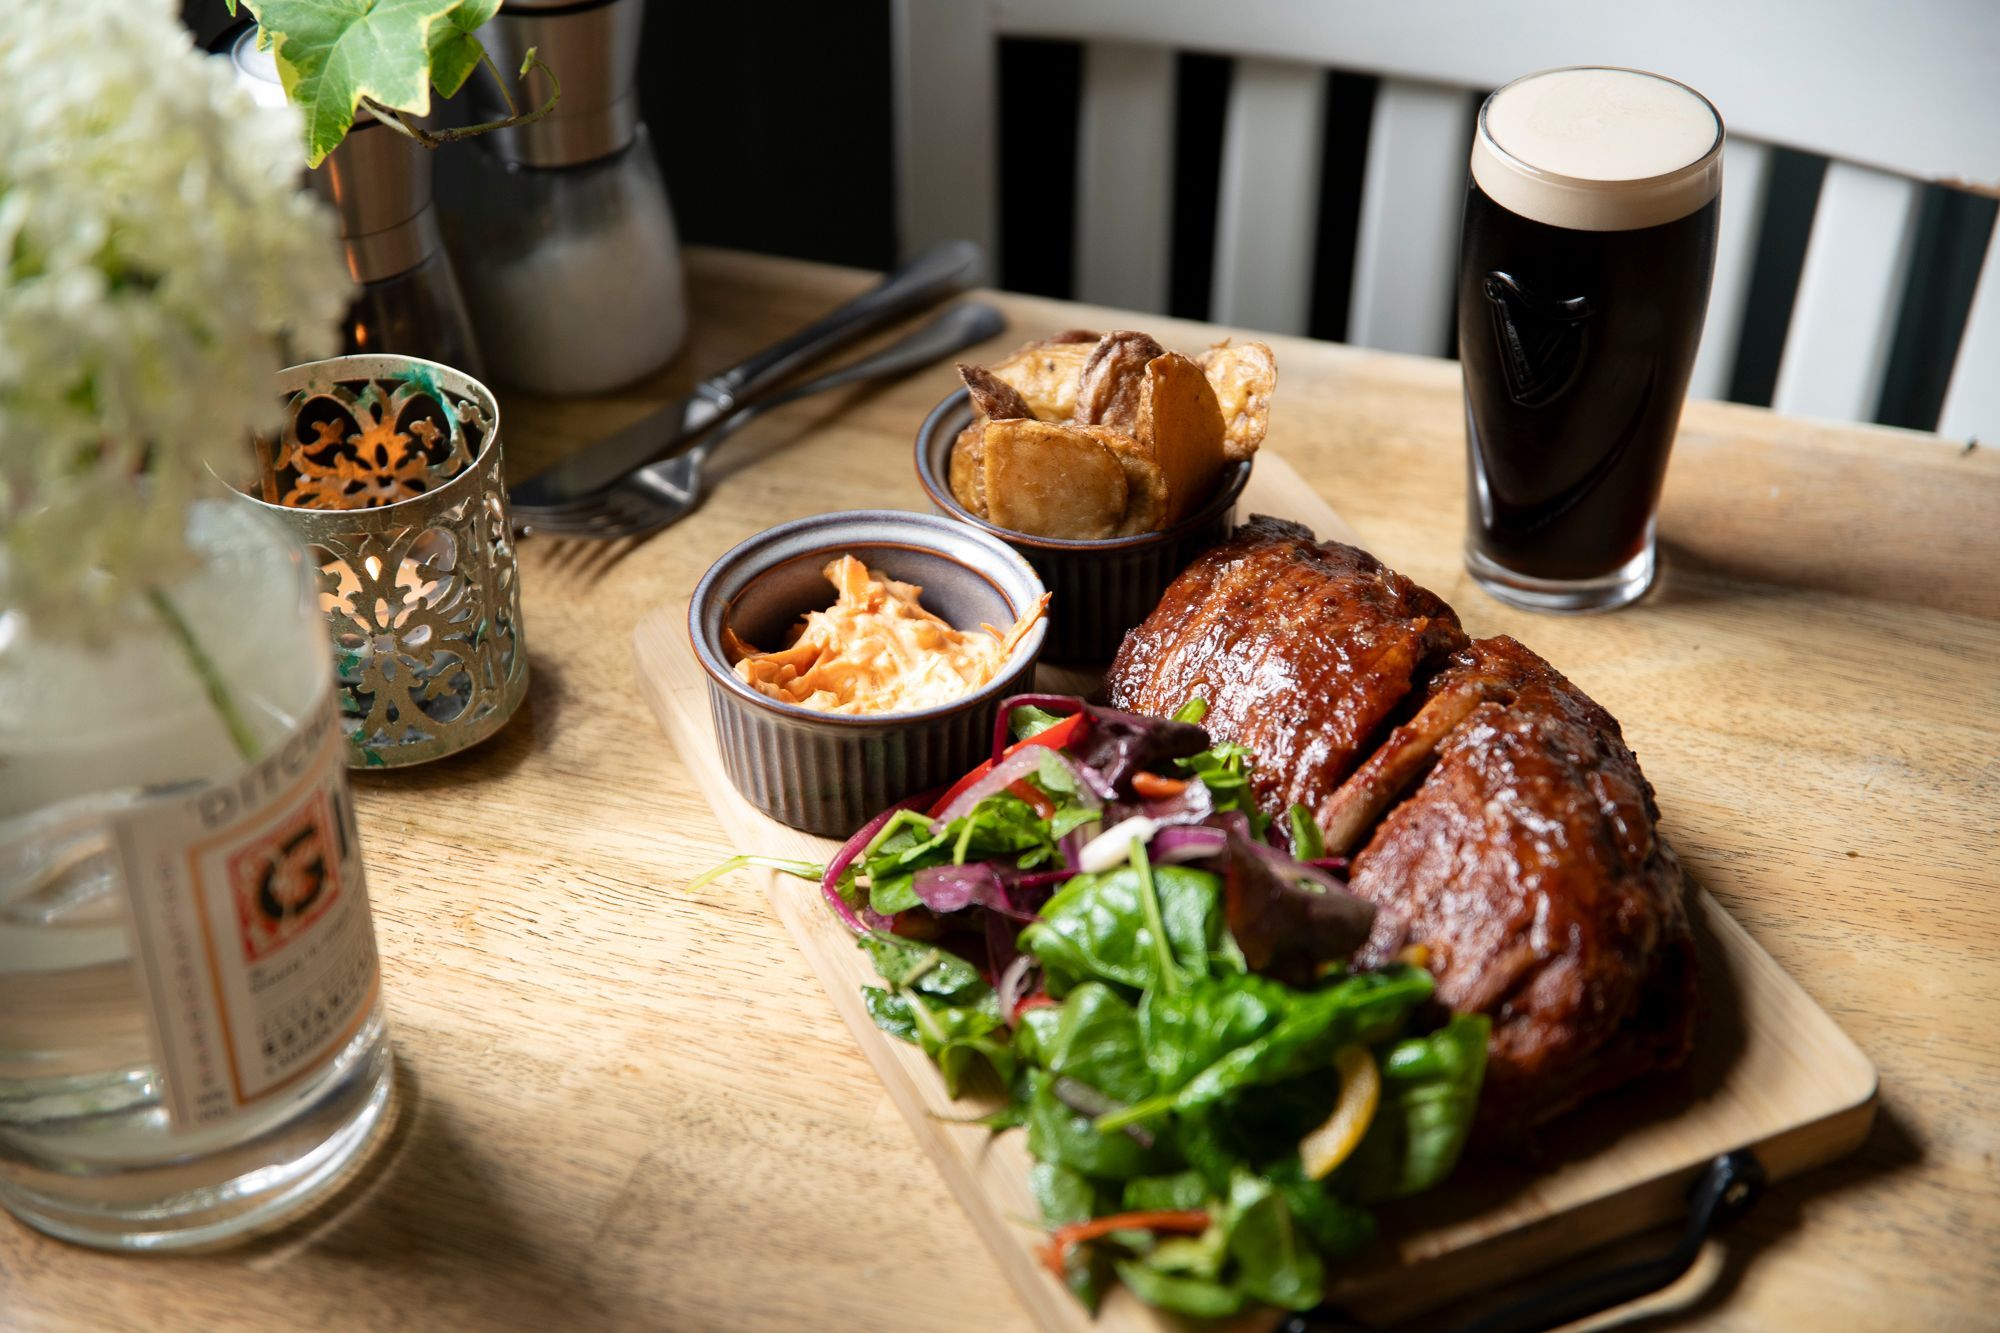 meat, potatoes, salad, sauce and dark beer served on the wooden table at the new inn